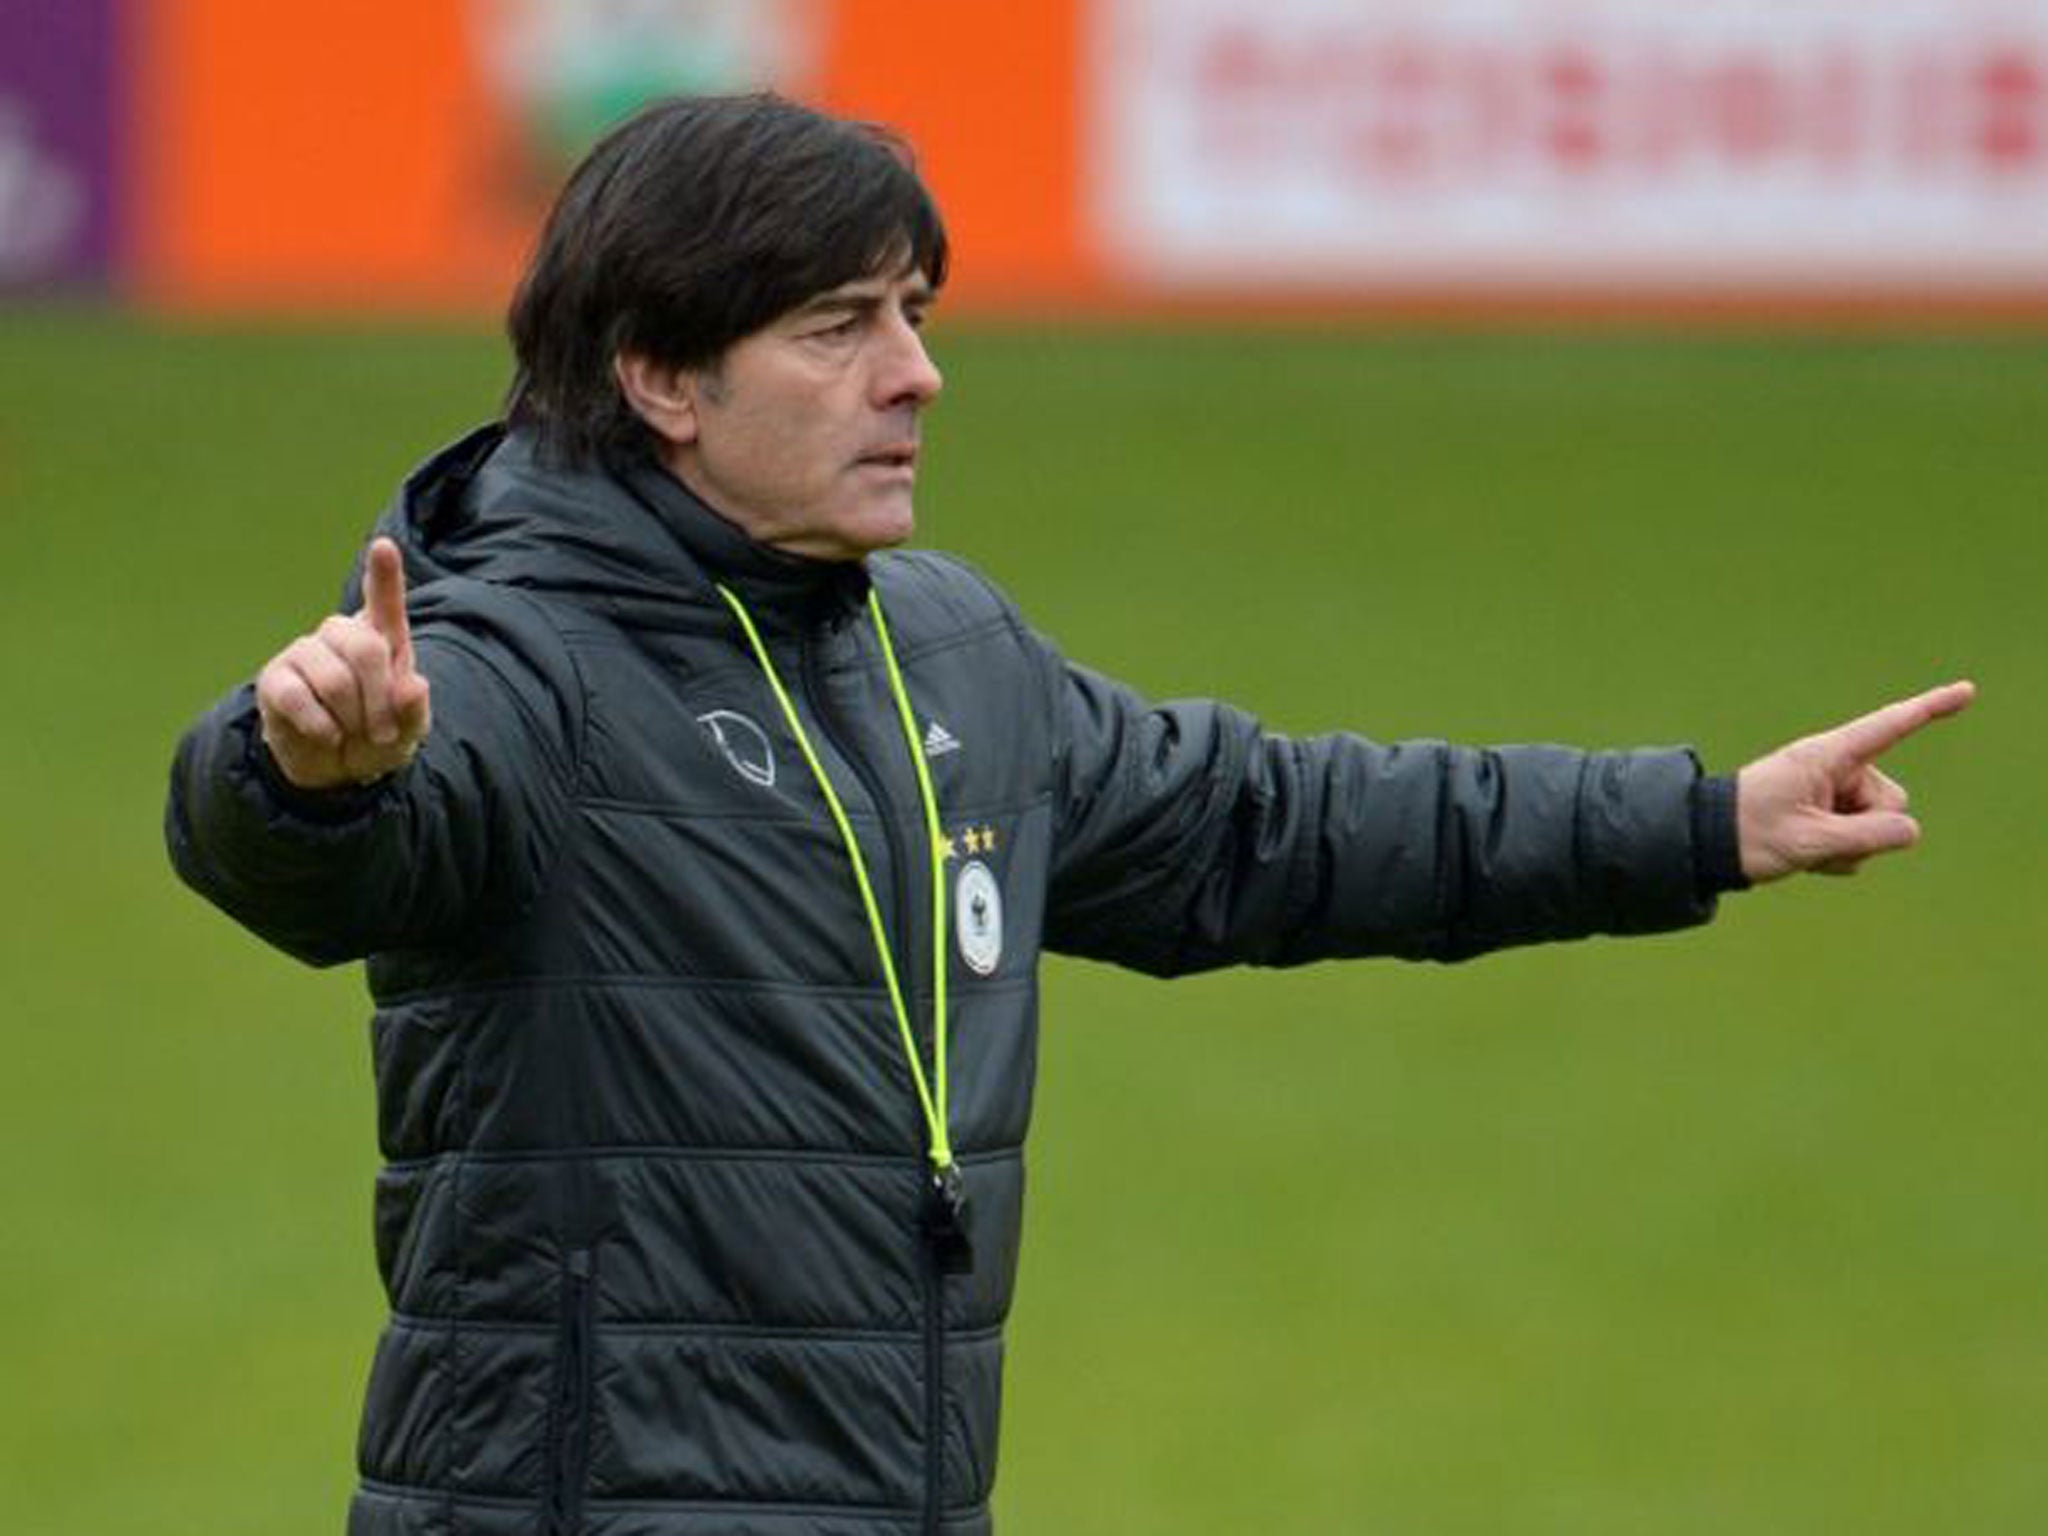 Joachim Low makes training with Germany